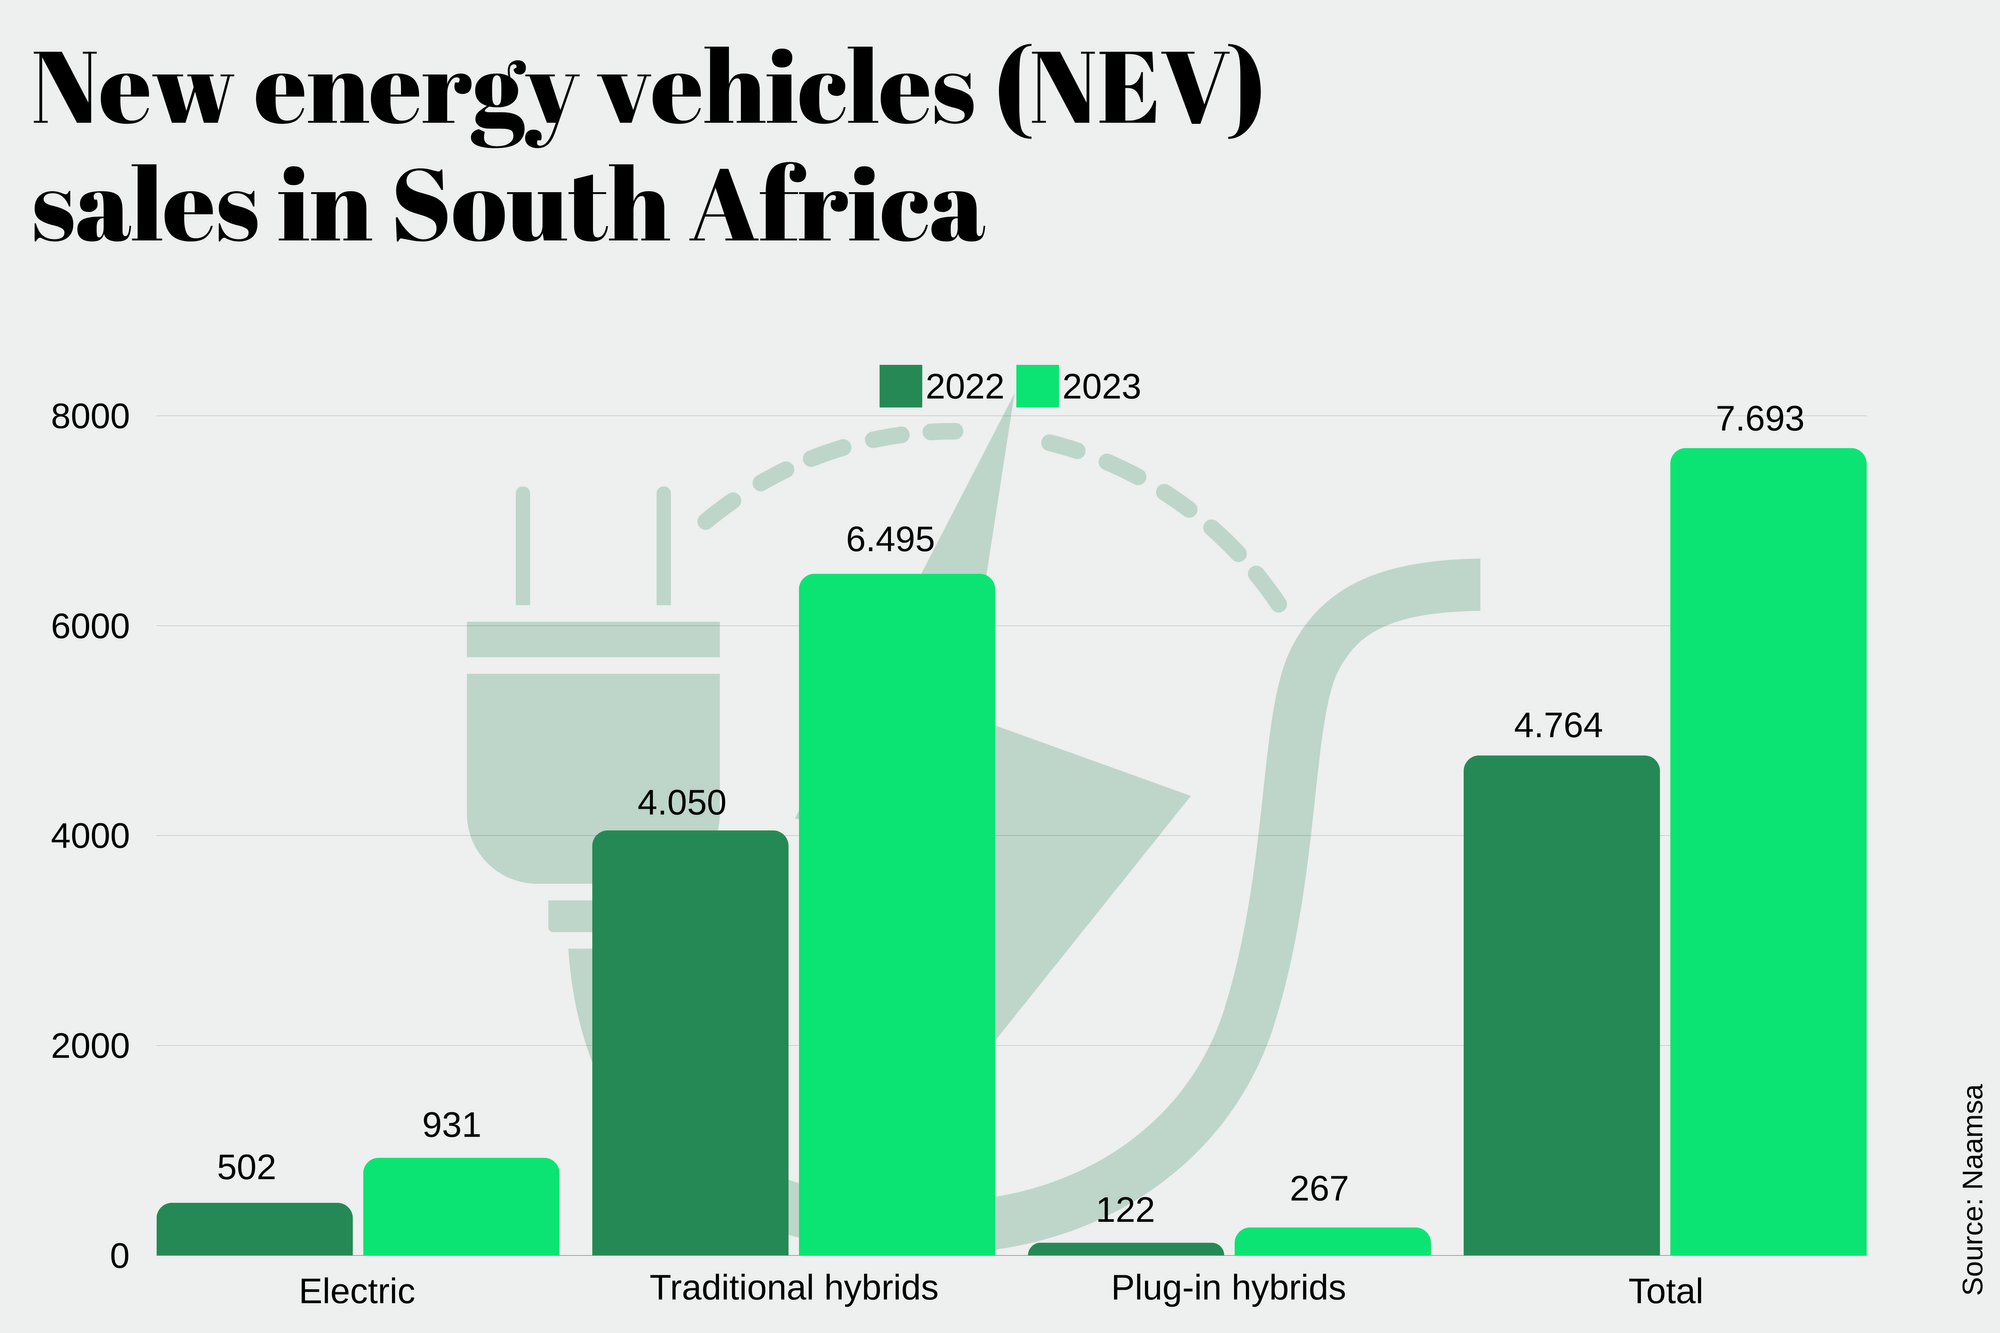 South Africa surpassed 7,000 NEV vehicles sold in 2023